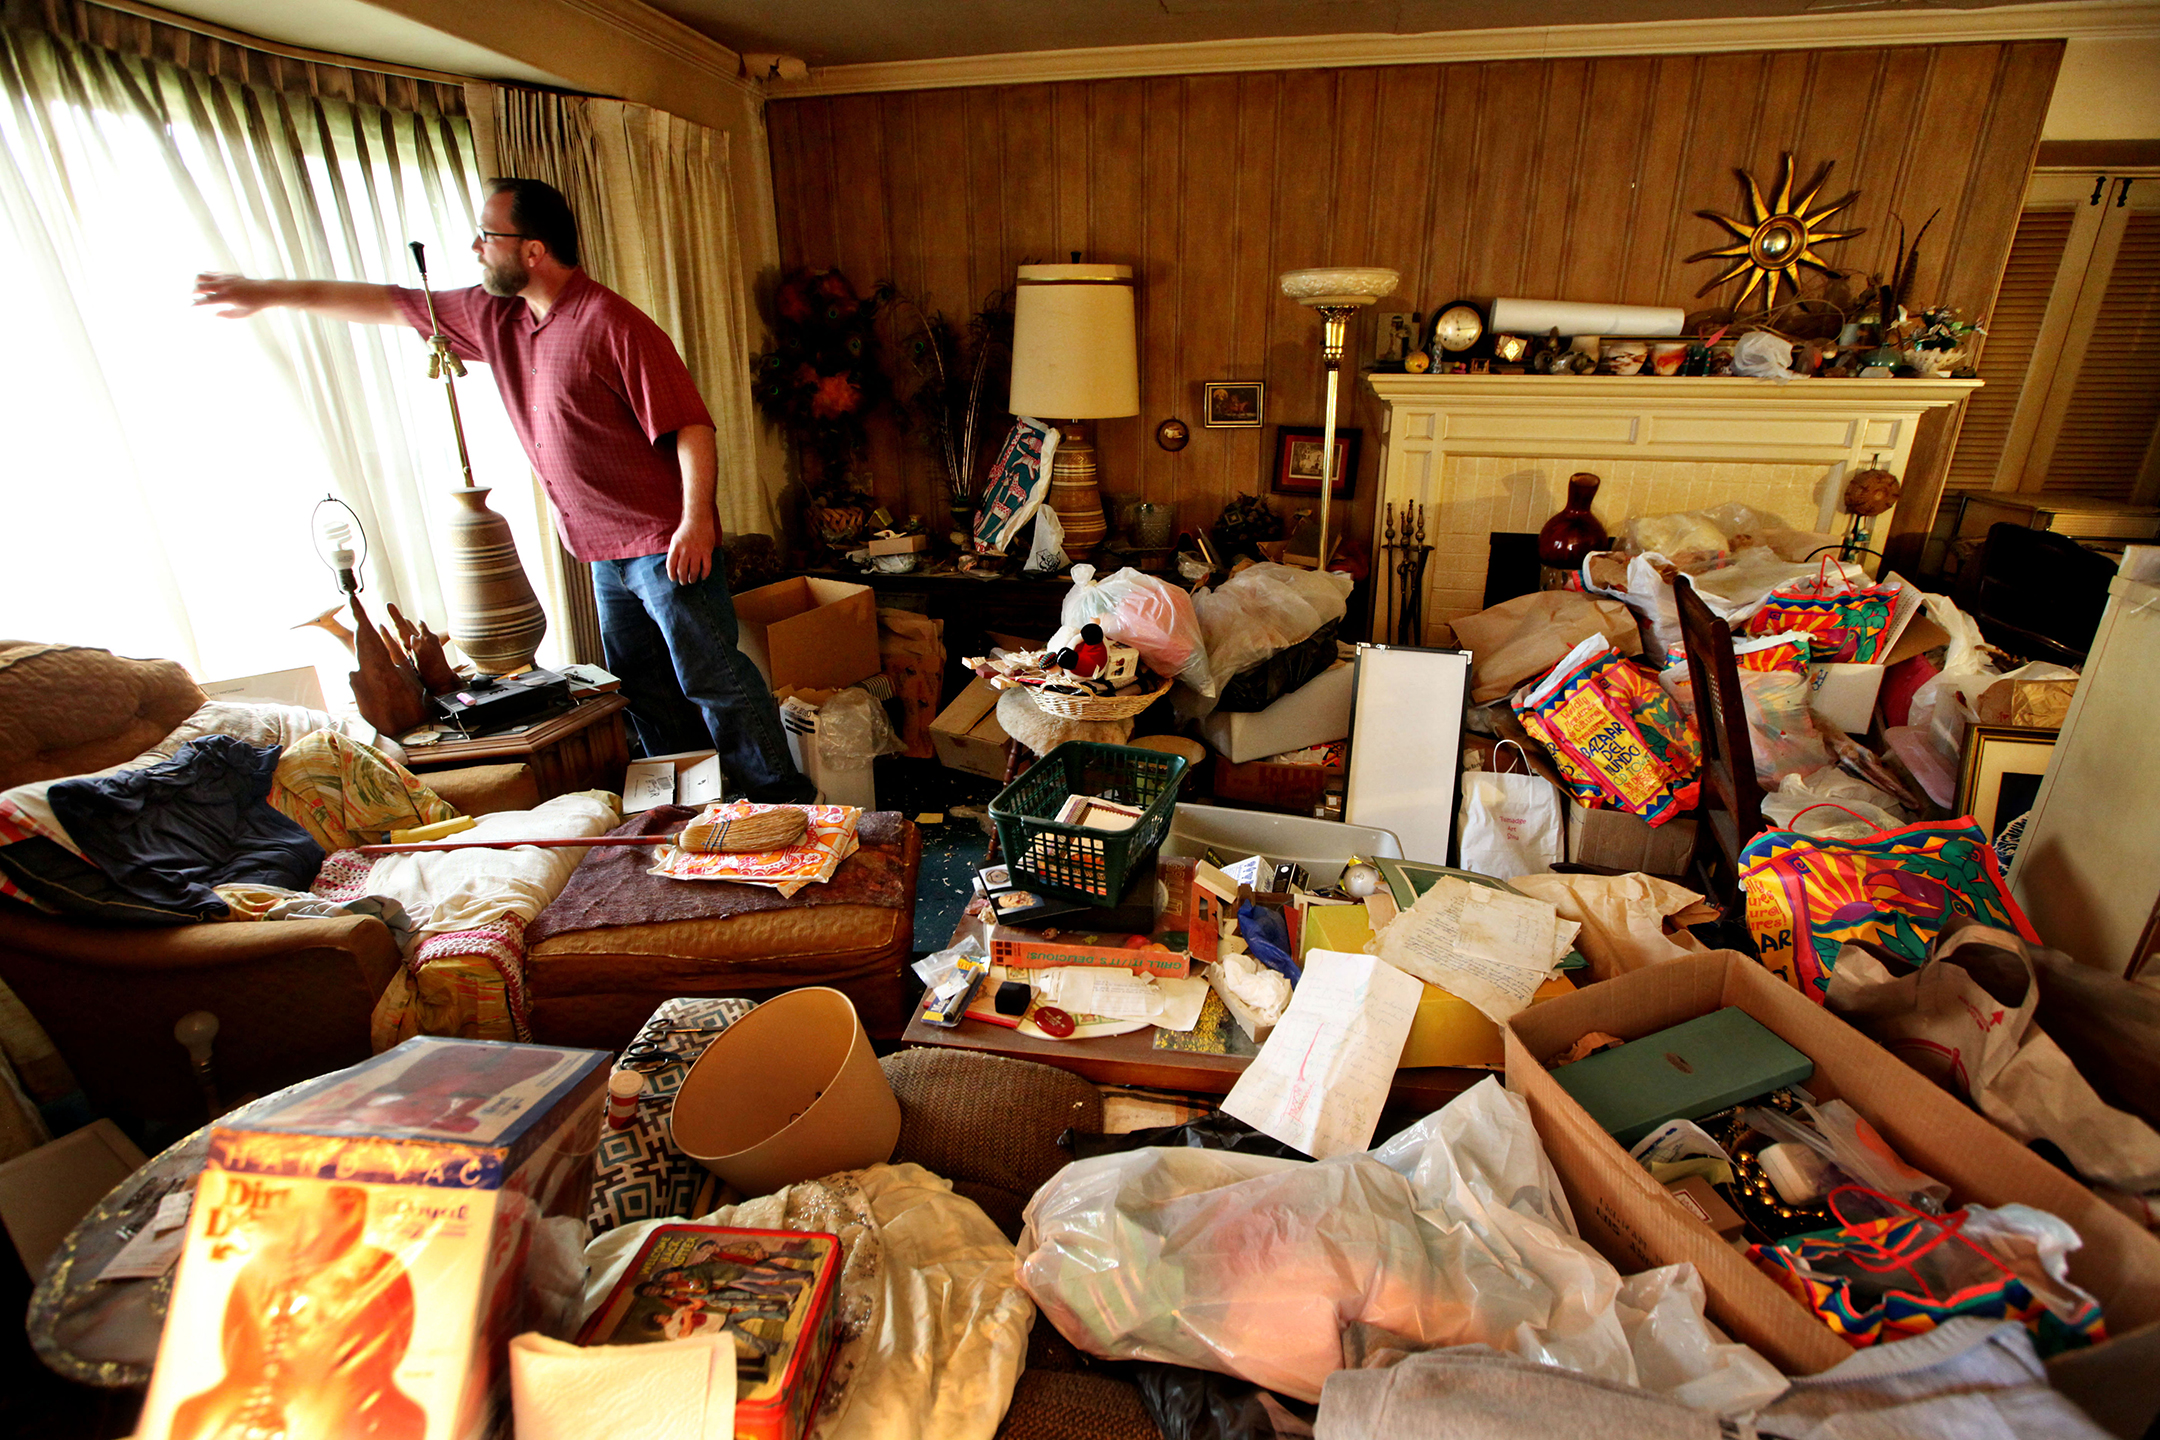 Photo of a living room cluttered with stuff, with Greg Martin looking out the window on the left